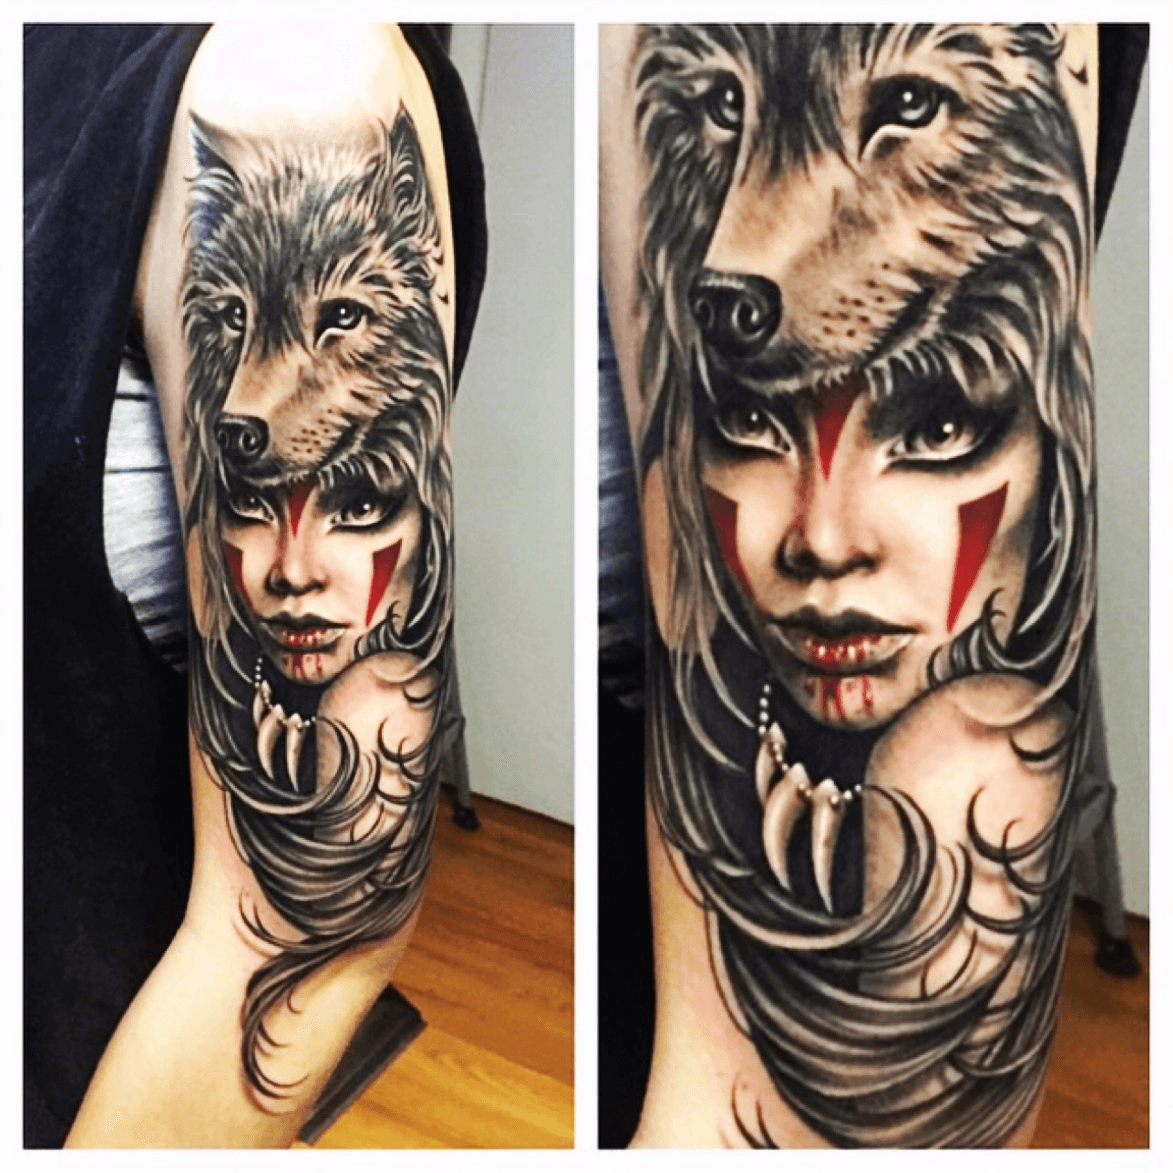 Full sleeve portrait tattoo in black and grey realism by Alo Loco London  UK  The Viking Woman